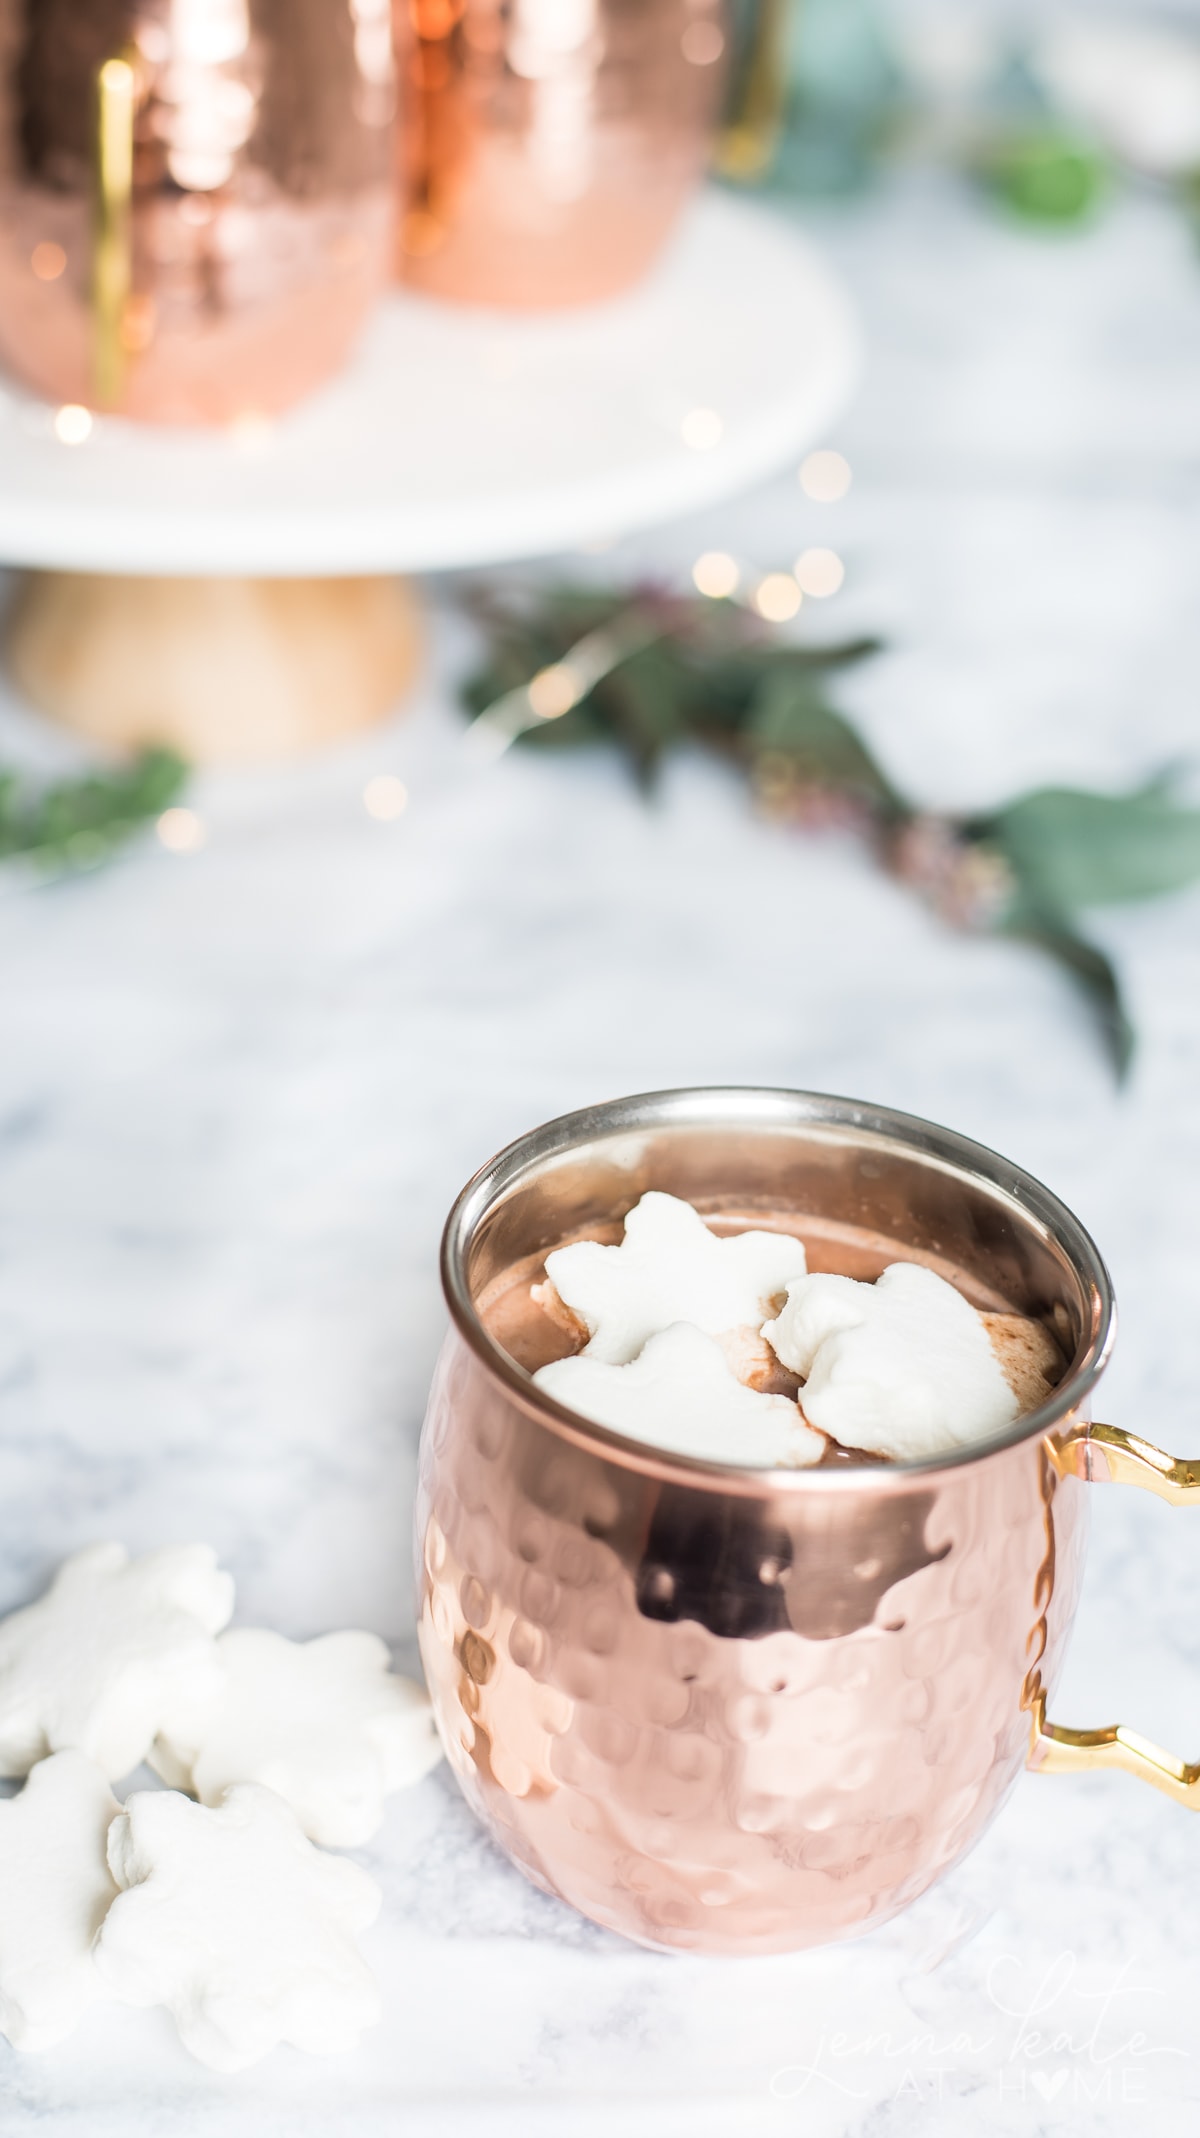 This made-from-scratch hot chocolate is rich and creamy, and perfectly topped with marshmallows